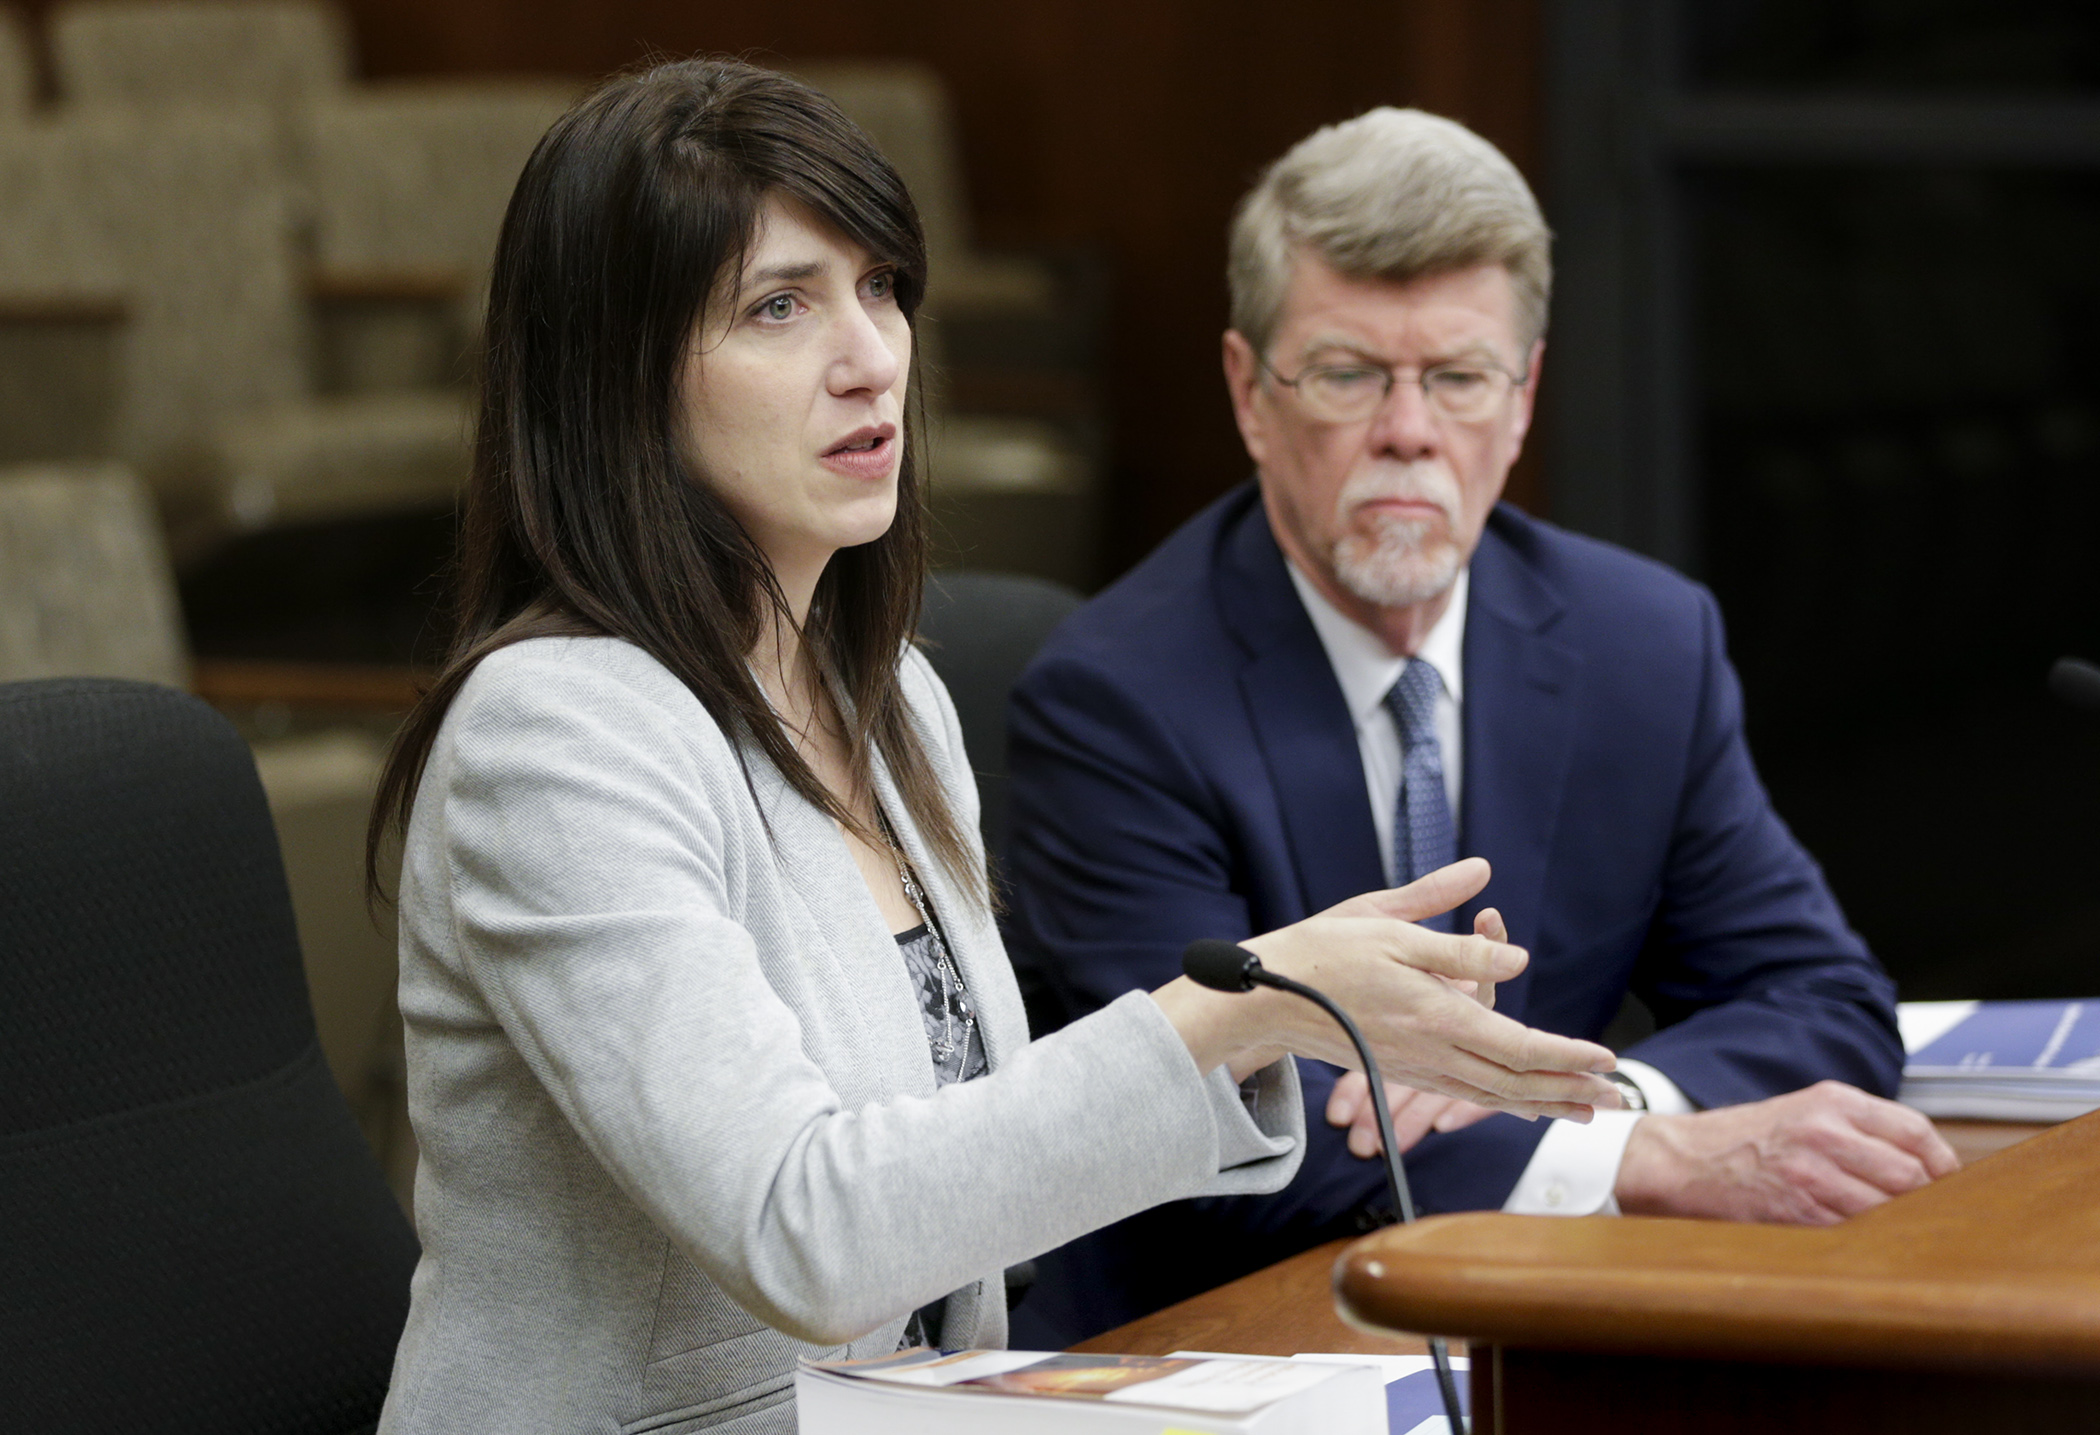 Lori Leysen, audit director with legislative auditor’s office, describes her findings from the Special Review of the State Auditor’s County Audits as State Auditor James Nobles listens. Photo by Paul Battaglia